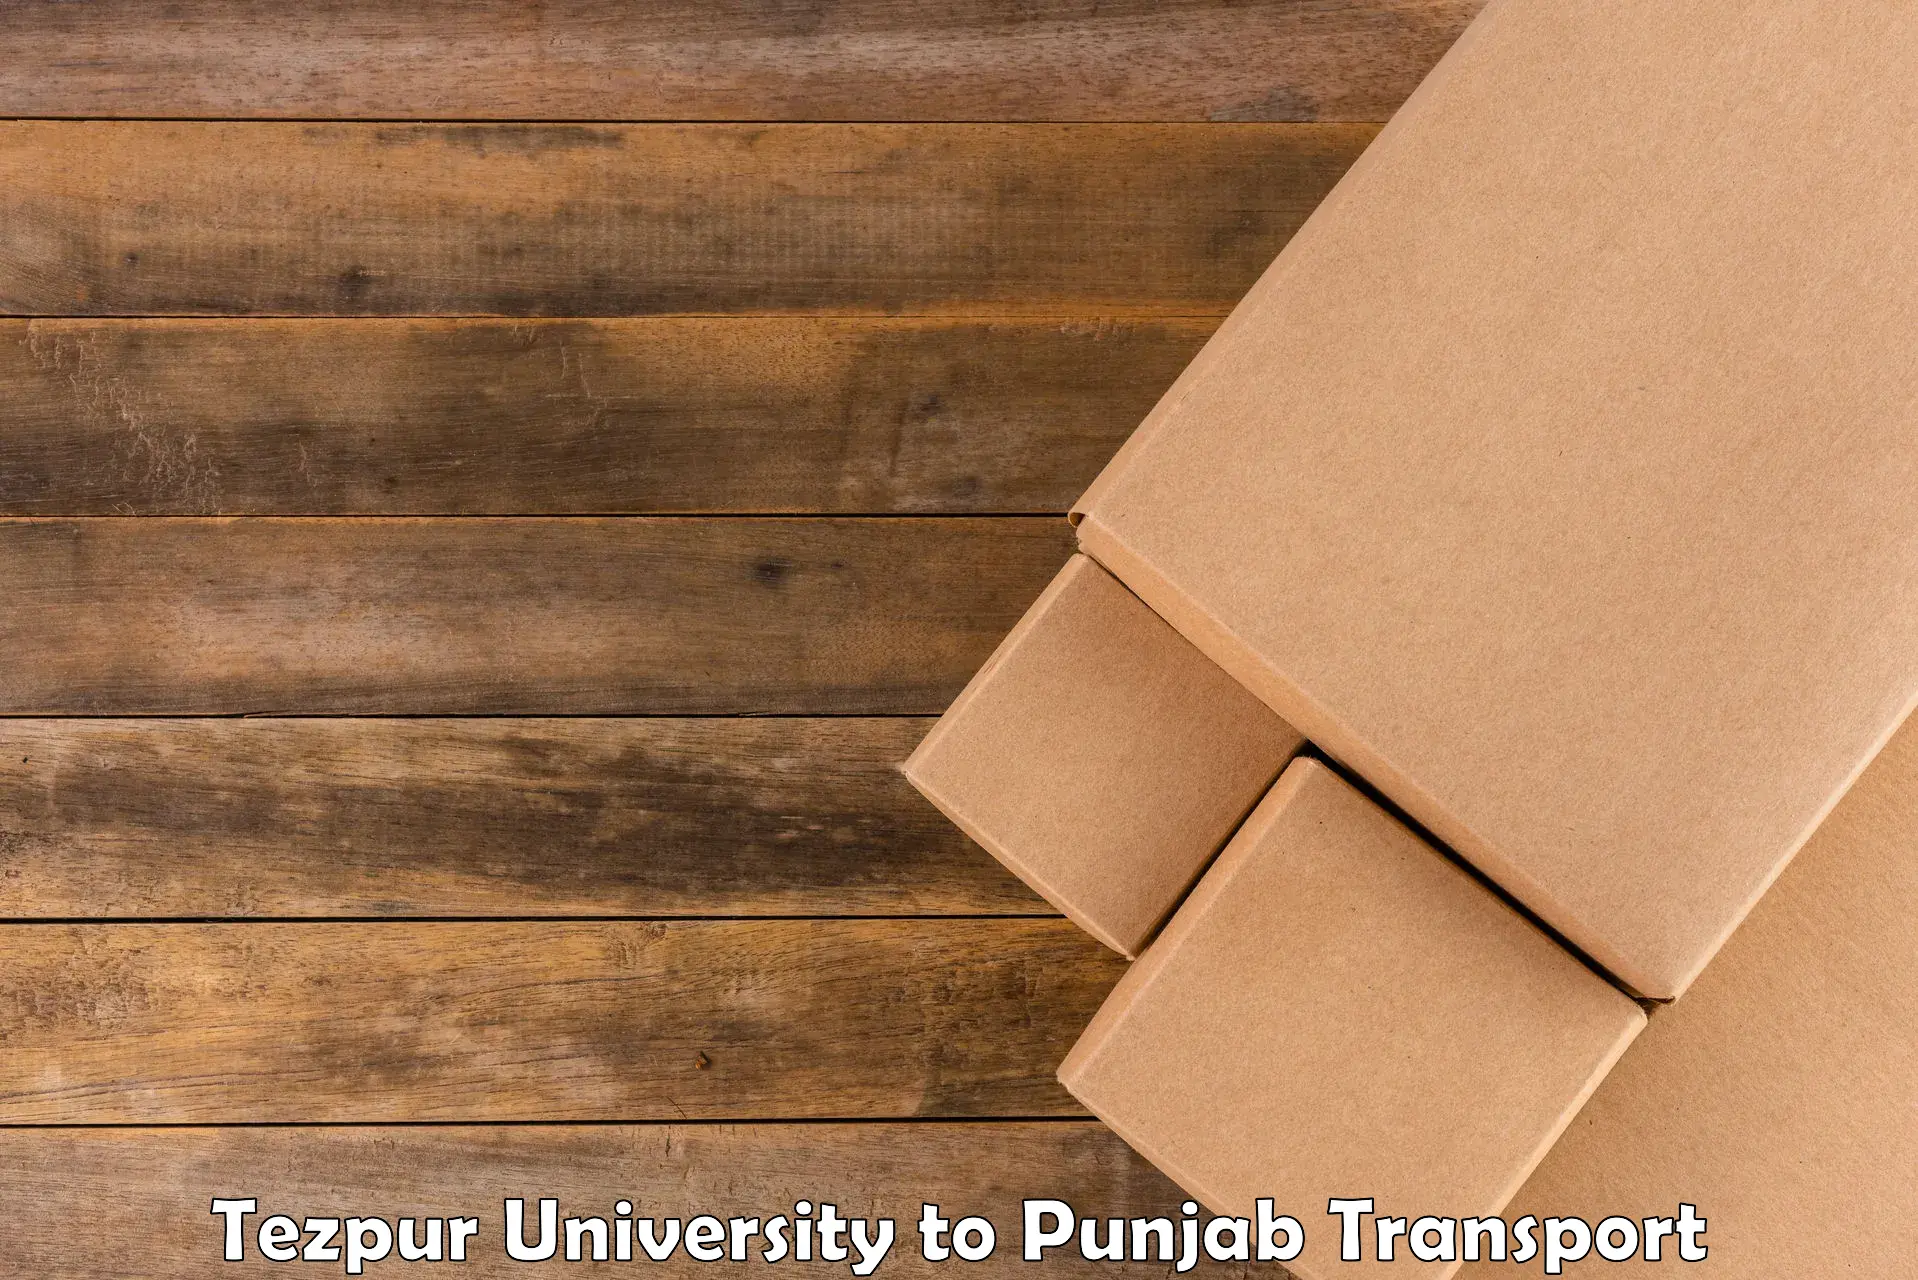 Domestic transport services in Tezpur University to Sultanpur Lodhi